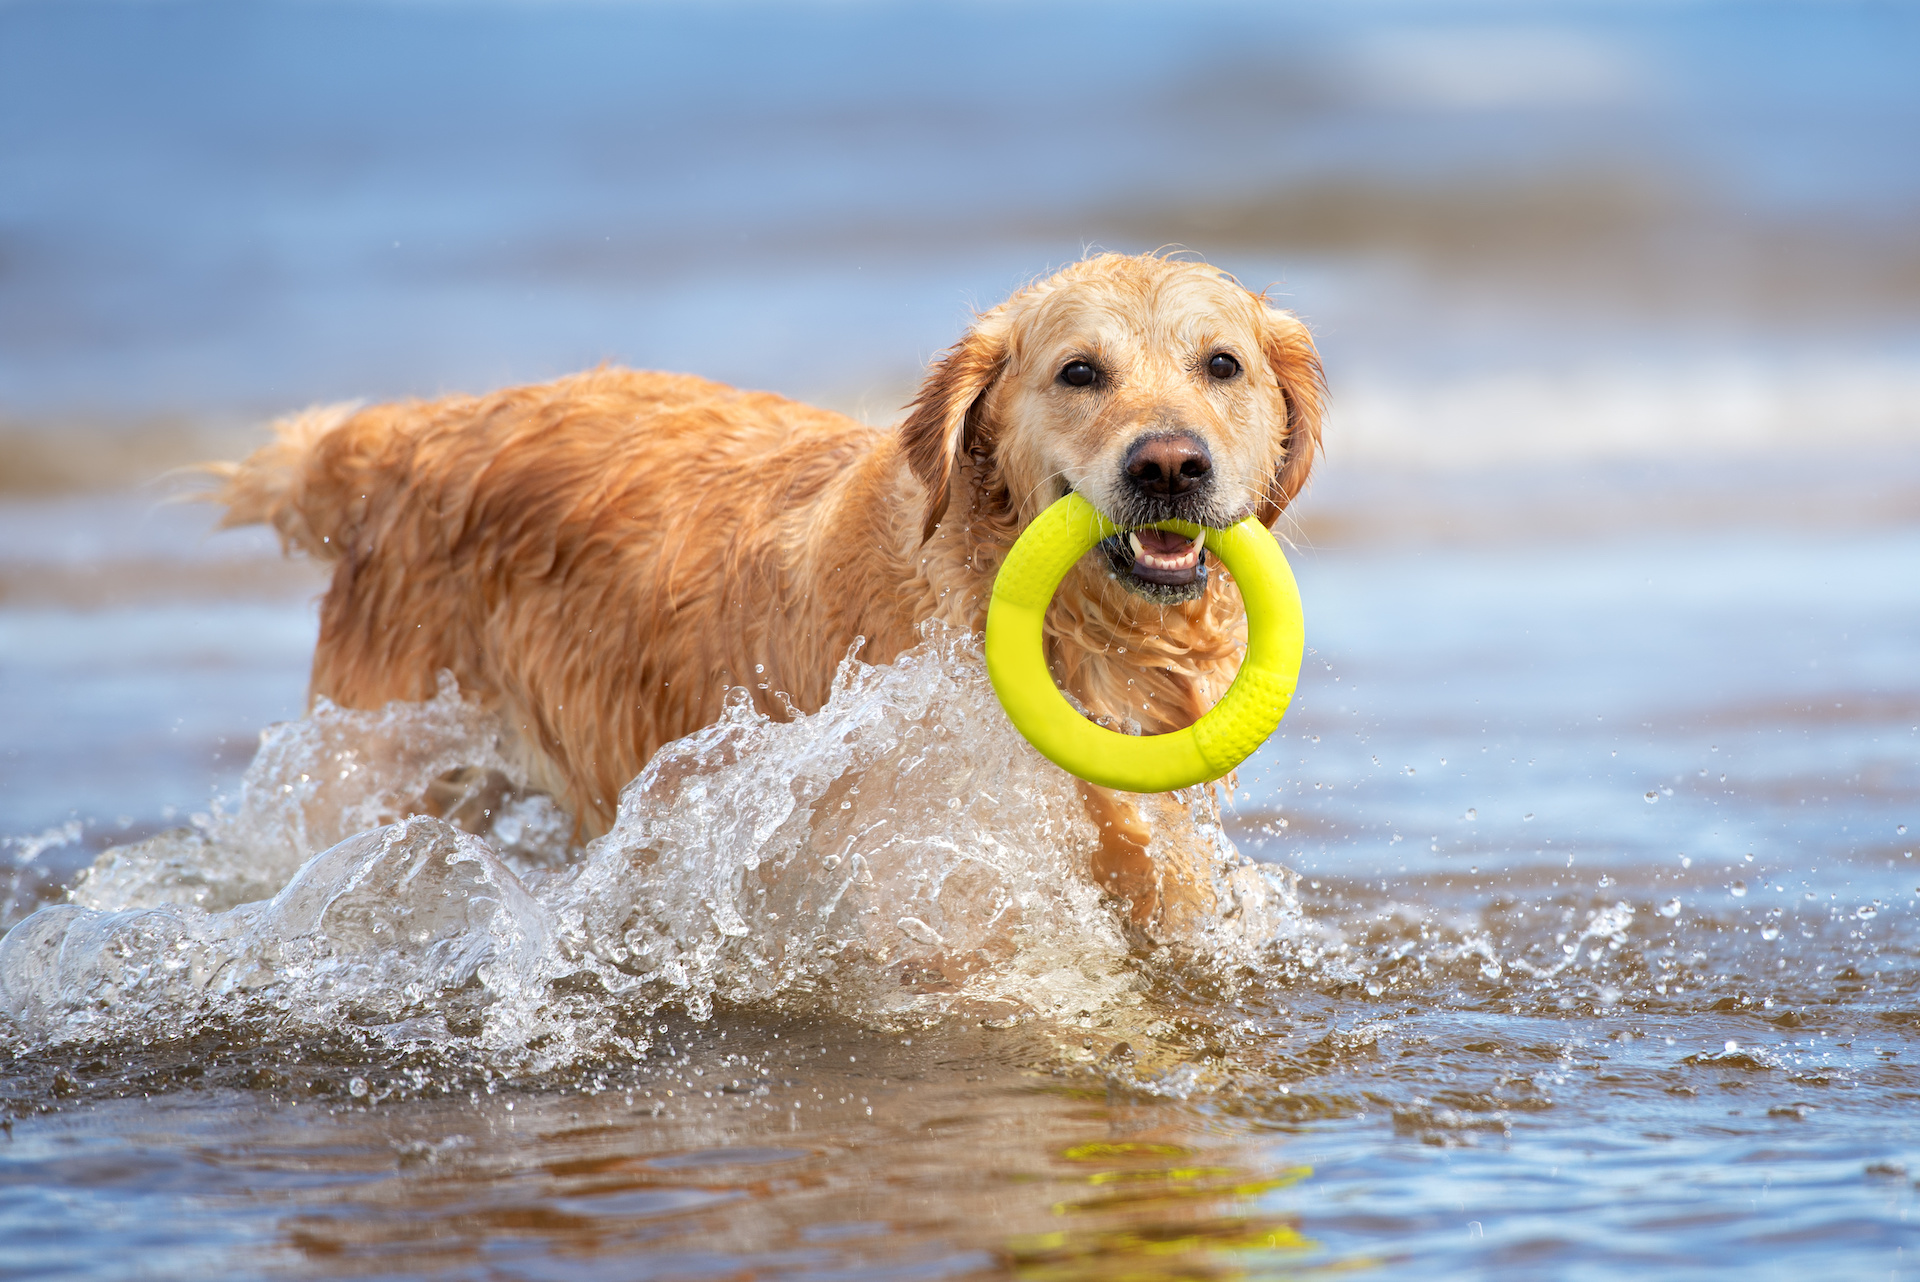 https://thehappygolden.com/wp-content/uploads/2022/07/The-Best-Toys-for-Golden-Retrievers-Golden-Retriever-Fetching-a-Toy-Ring-From-the-Sea.jpeg